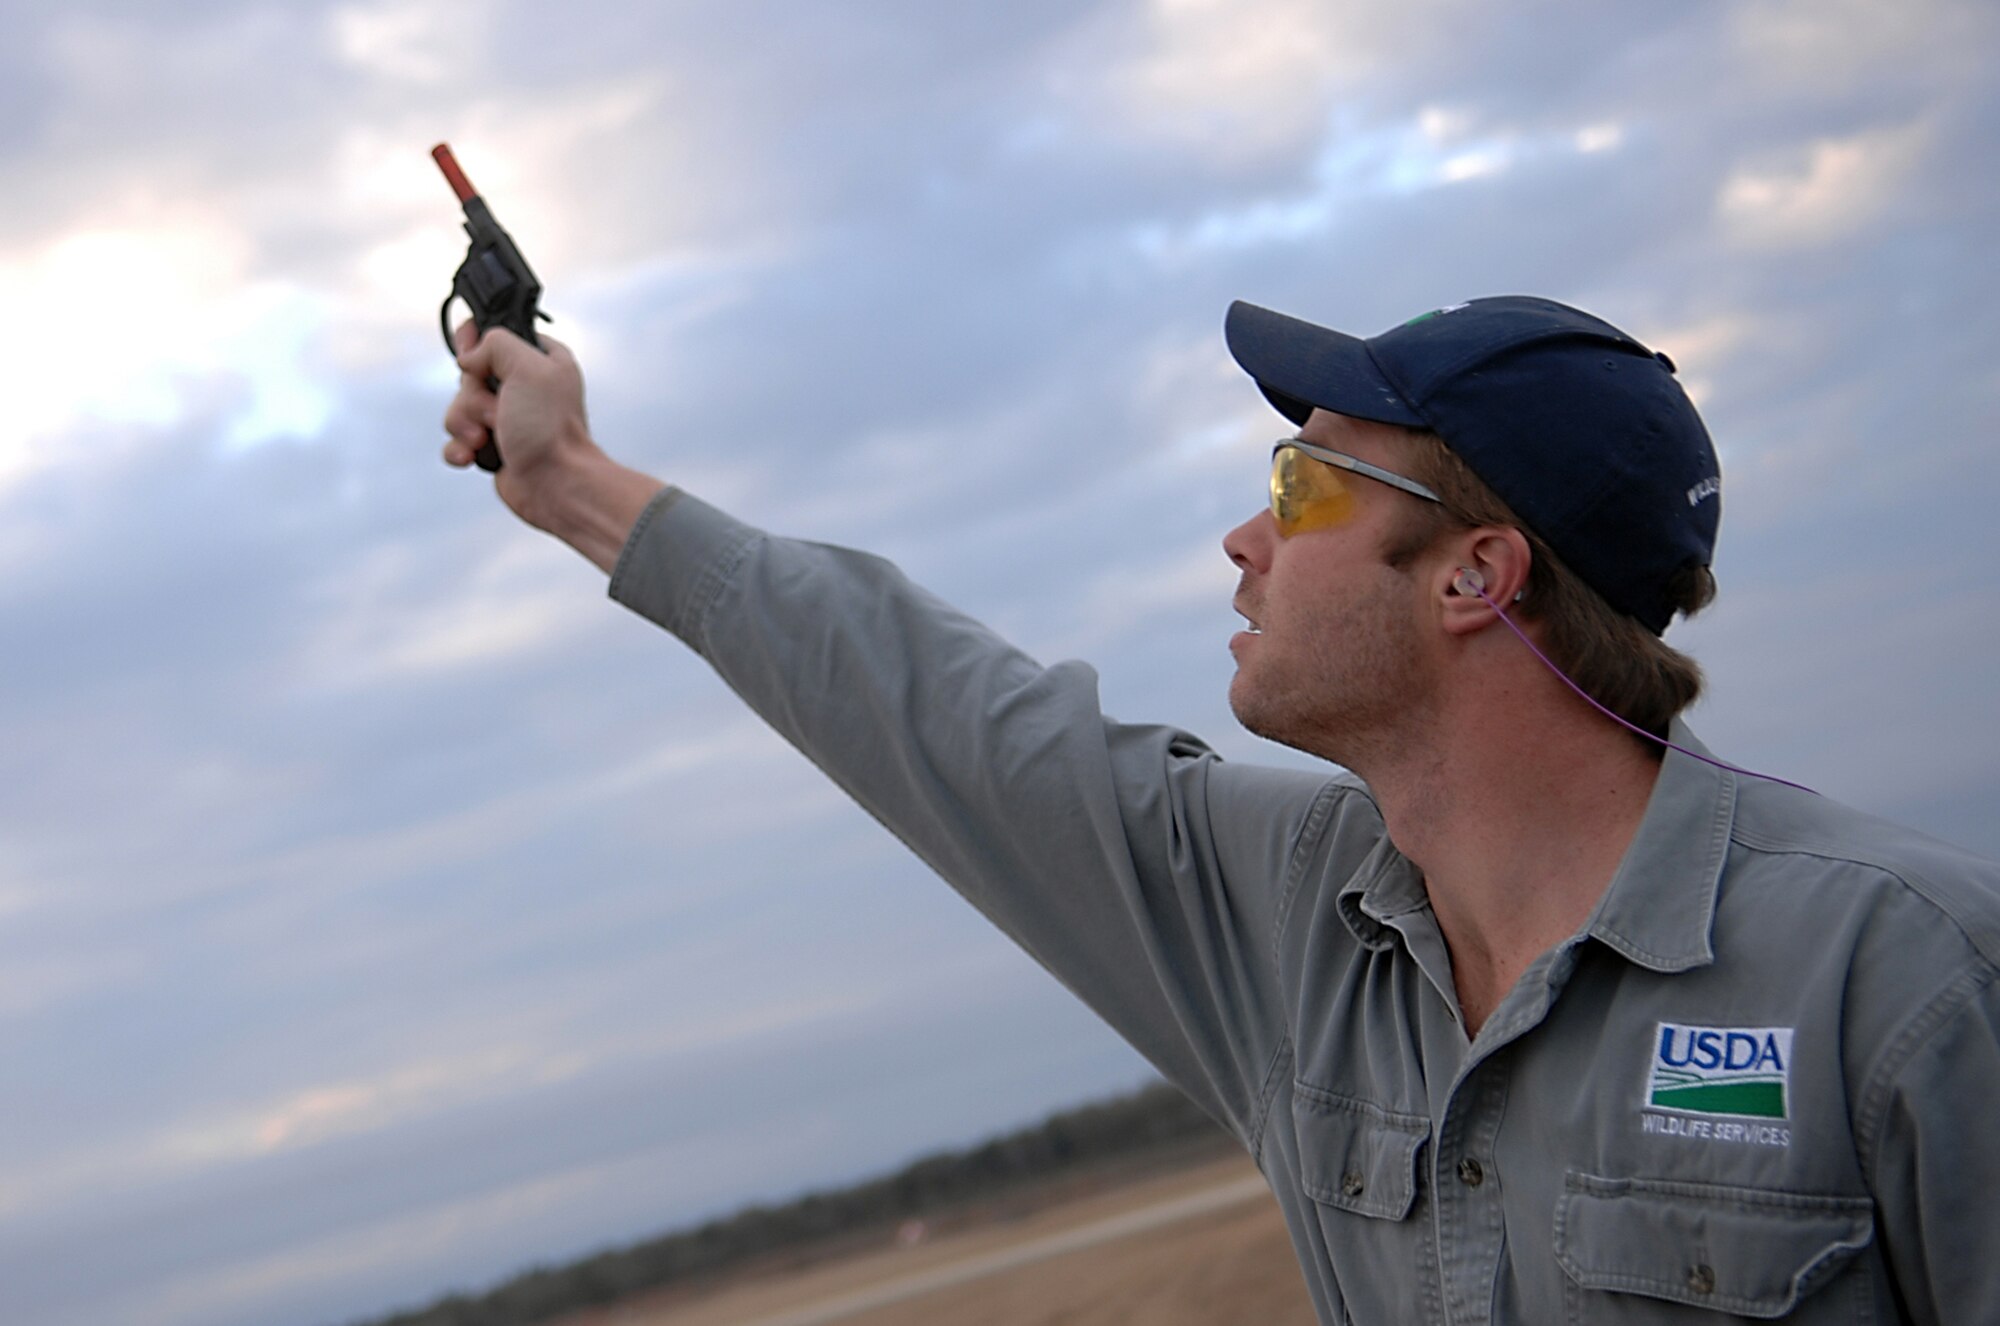 MOODY AIR FORCE BASE, Ga. -- Odin Stephens, 23rd Wing wildlife biologist, shoots a pyrotechnic starter pistol here Jan. 30. Mr. Stephens uses pyrotechnics called screamers, bangers and shellcrackers to scare wildlife away from the flightline. (U.S. Air Force photo by Airman 1st Class Brittany Barker) 